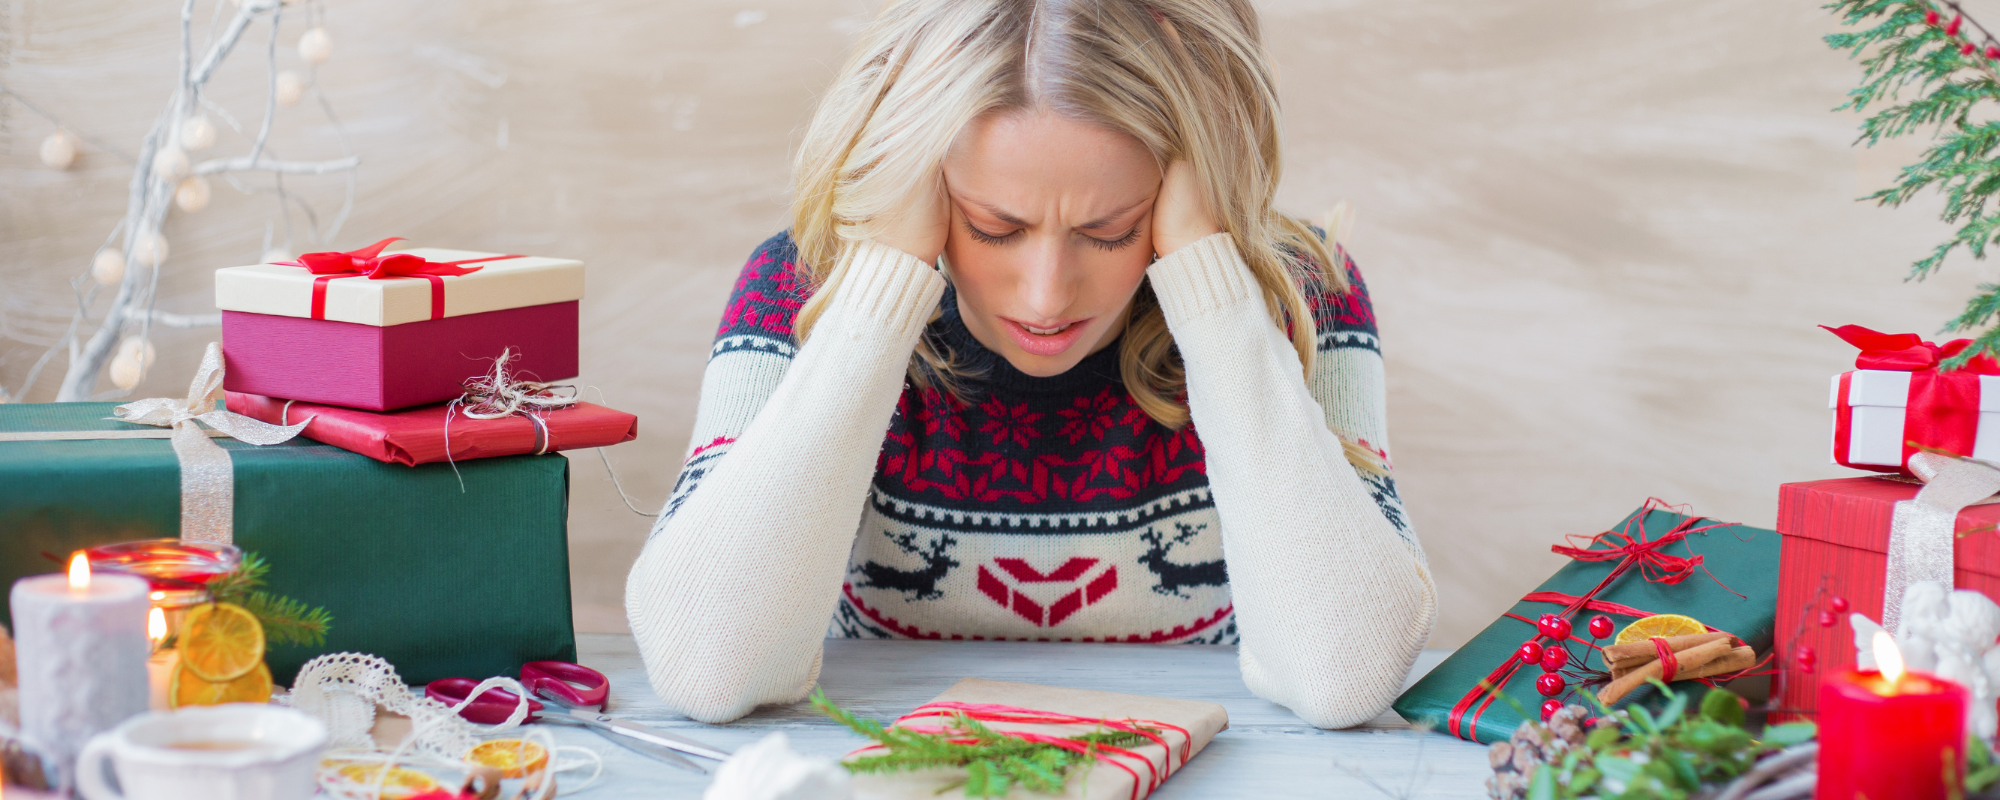 Tips for Coping with Holiday Stress and Depression